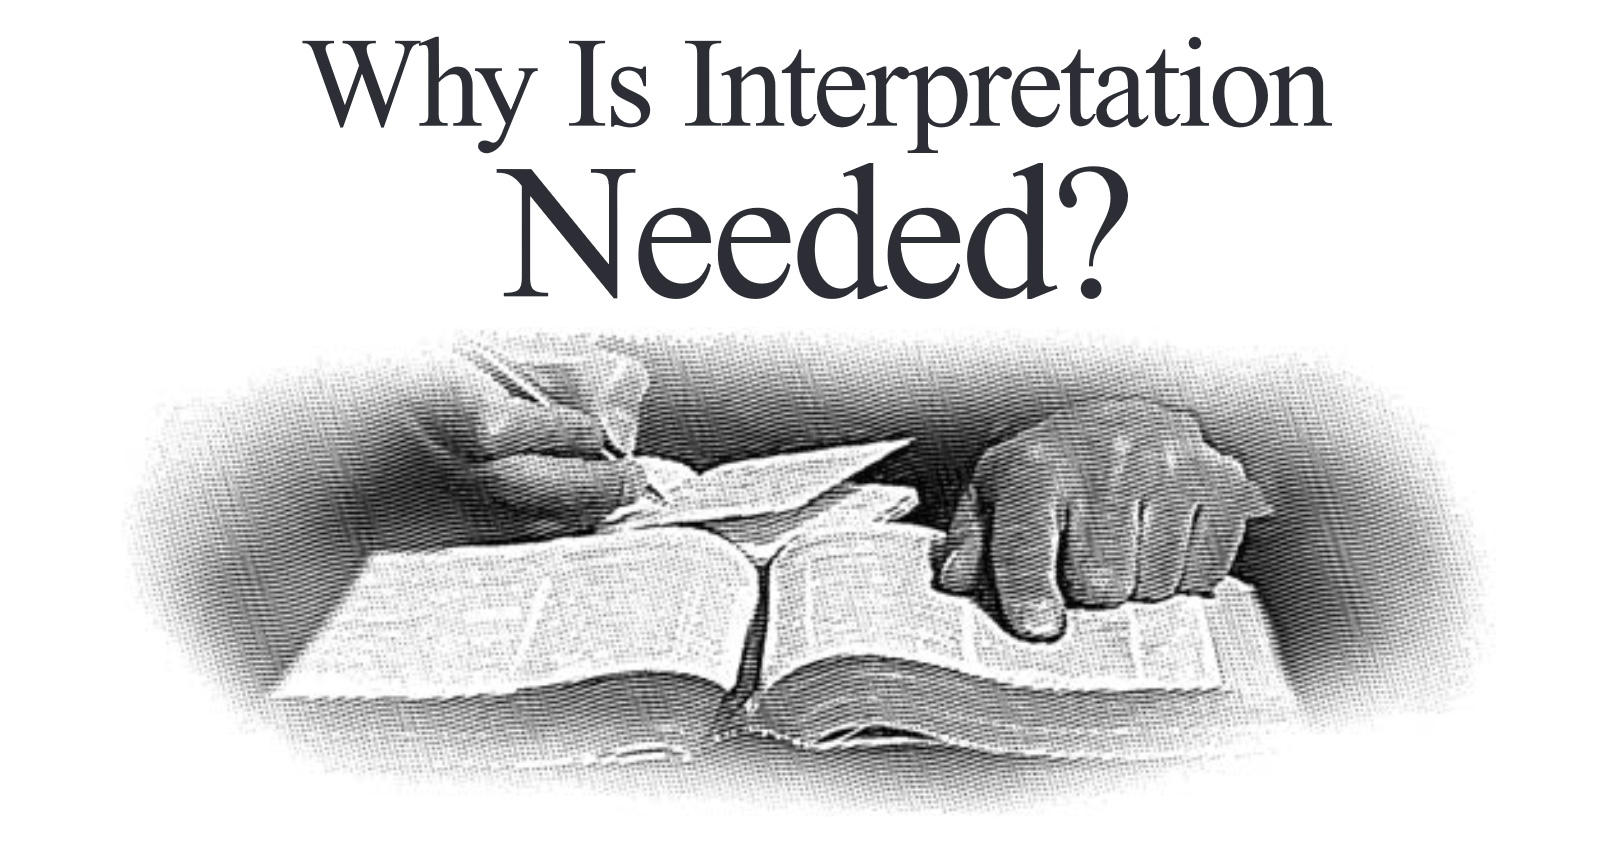 Lesson 6: Why Is Interpretation Needed? (2nd Quarter 2020) - Sabbath School Weekly Lesson. Weekly lesson for in-depth Bible study of Word of God.